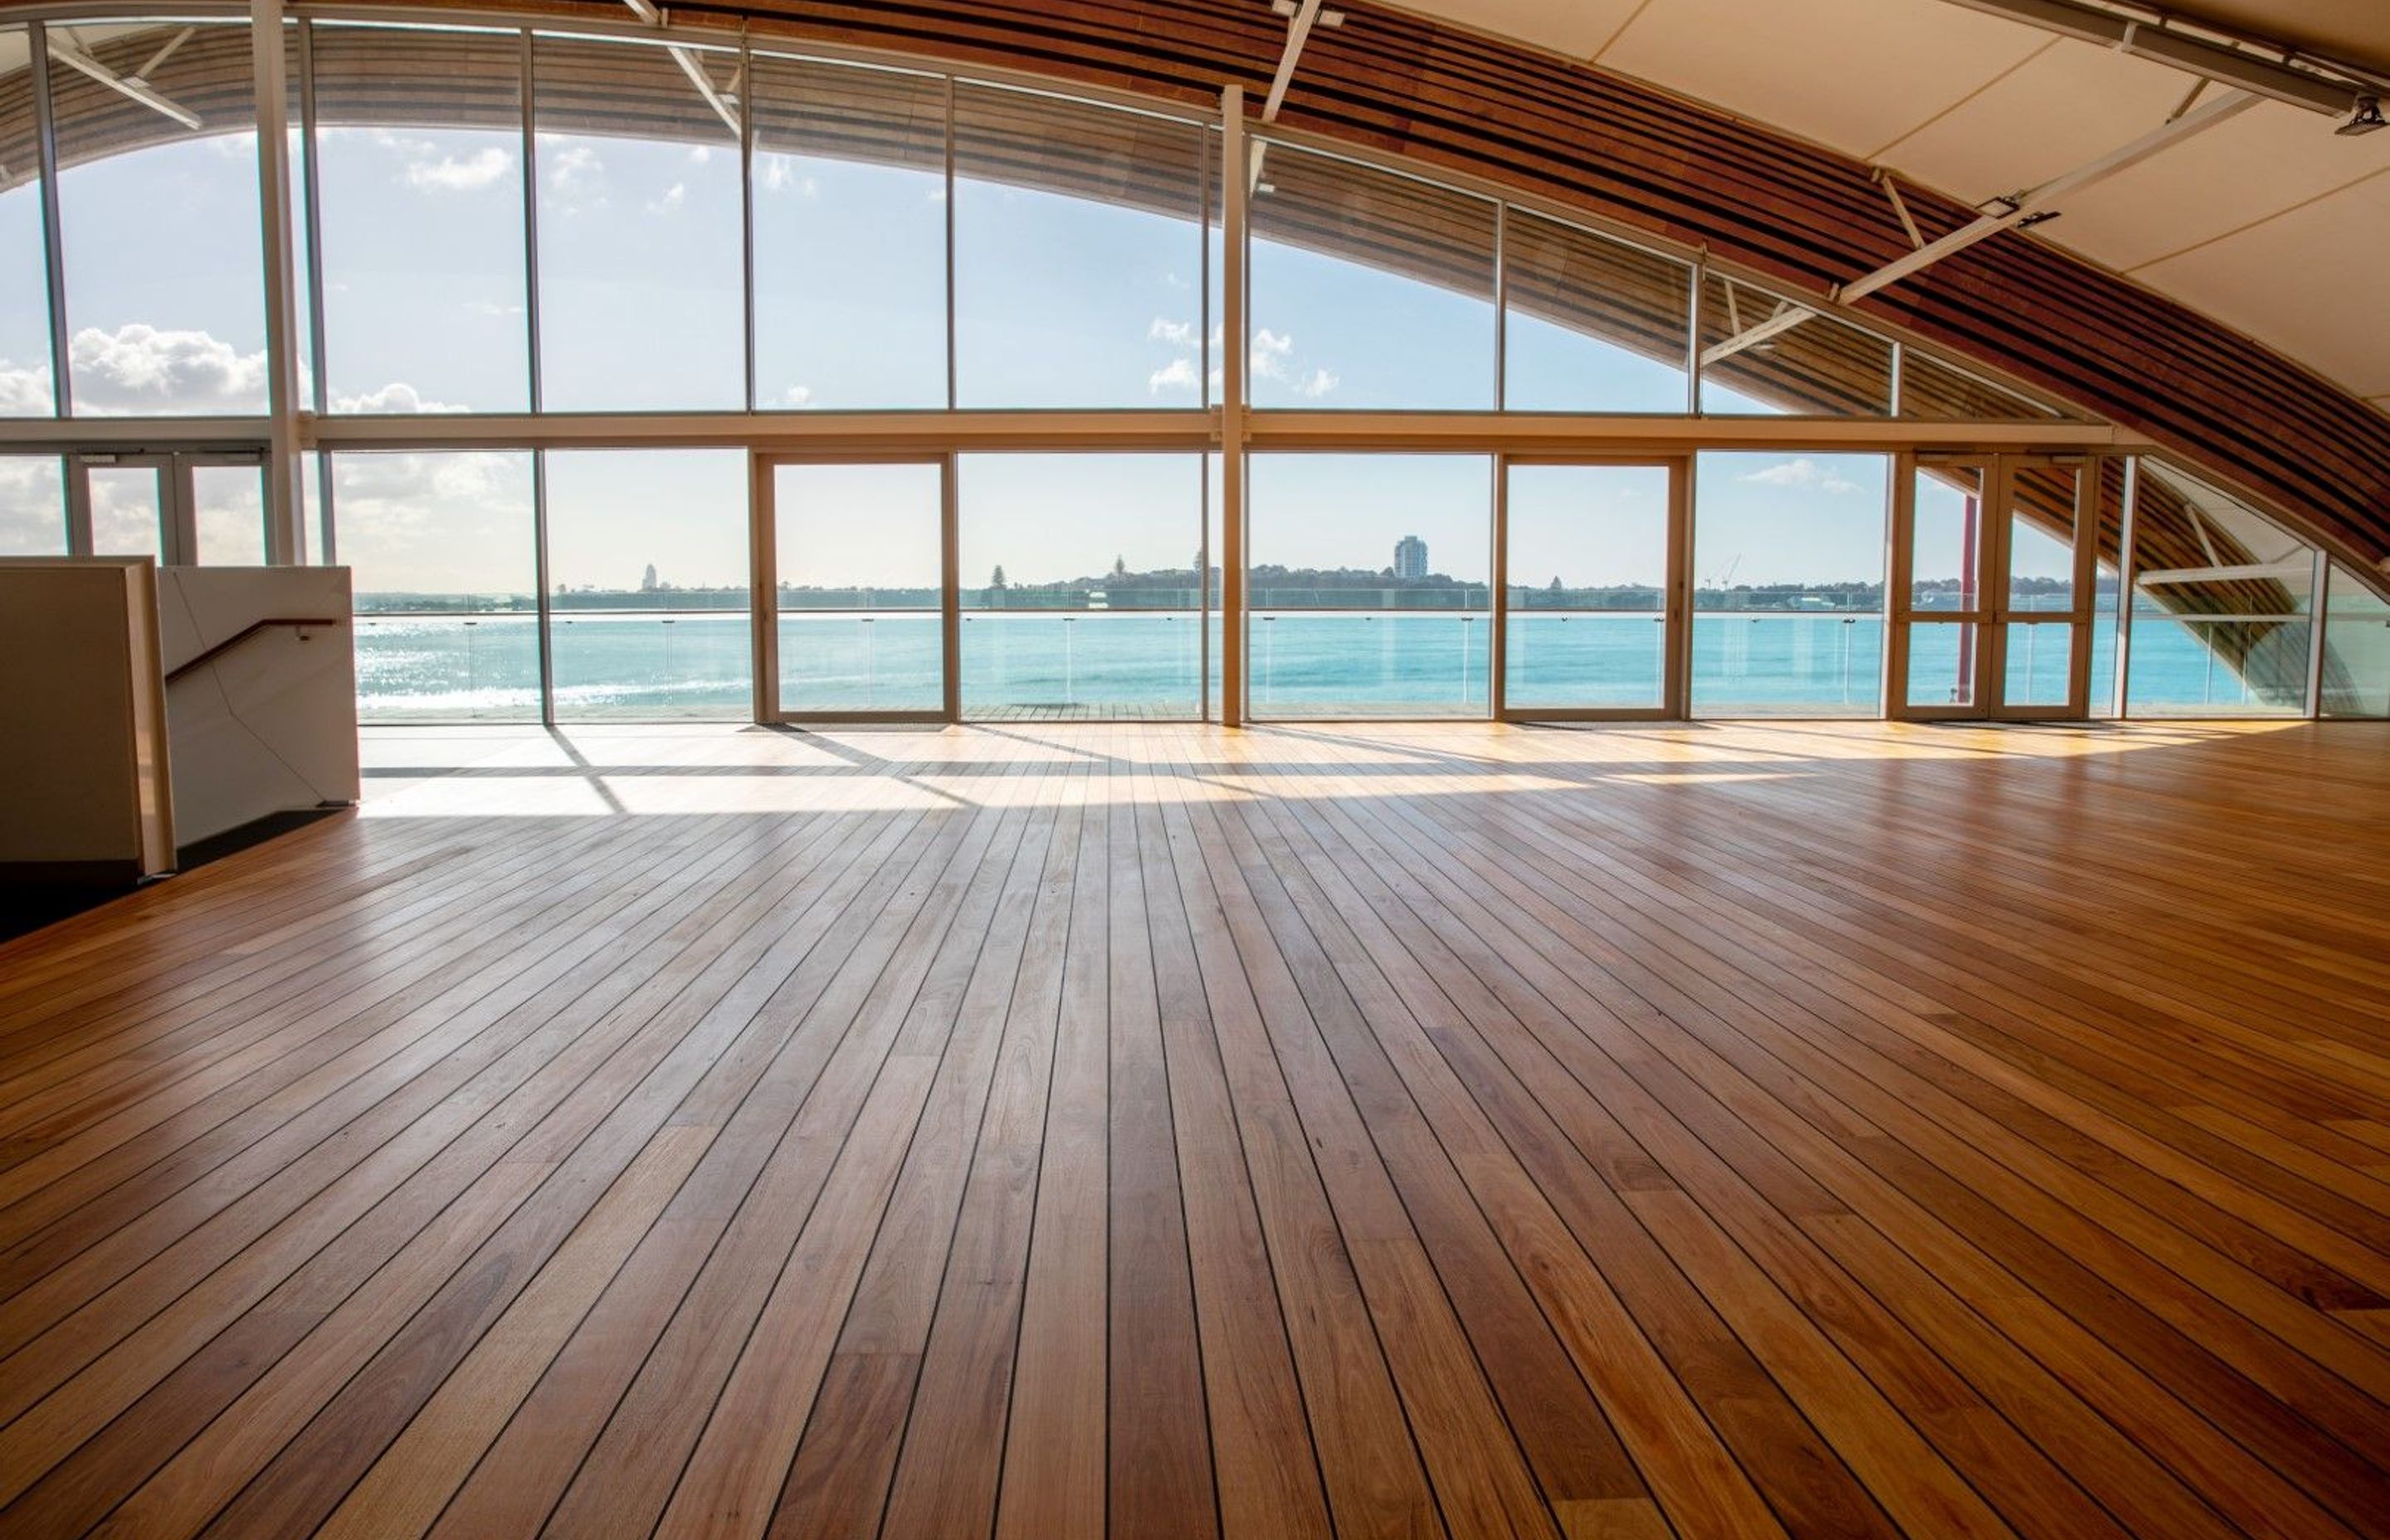 HURFORD'S Silvertop Custom Boat Deck Profile for THE CLOUD, Auckland's Waterfront  